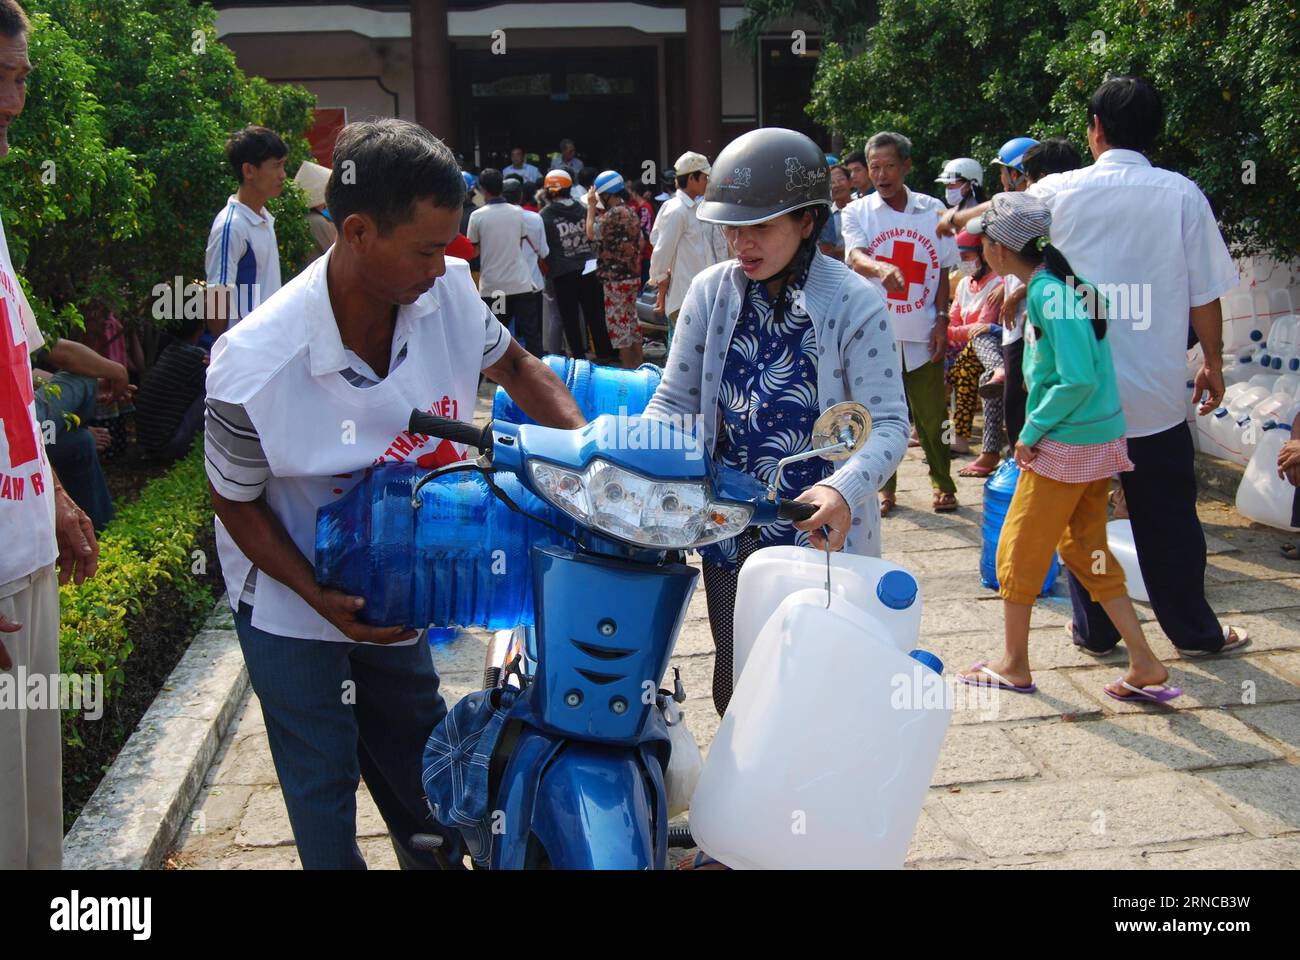 (160402) -- HO CHI MINH CITY, April 2, 2016 -- Members of Vietnam Red Cross distribute drinking water to local people in Ben Tre province, Vietnam, March 29, 2016. Due to the strong influence of the El Nino phenomenon, the Mekong Delta in southern Vietnam has encountered once in a century drought since the end of 2015 which seriously affected local people s life. Mekong Delta, Vietnam s largest and most fertile plain, has an area of over 40,000 square kilometers and covers 13 provinces and cities. ) VIETNAM-MEKONG DELTA-DROUGHT VNA PUBLICATIONxNOTxINxCHN   Ho Chi Minh City April 2 2016 Members Stock Photo